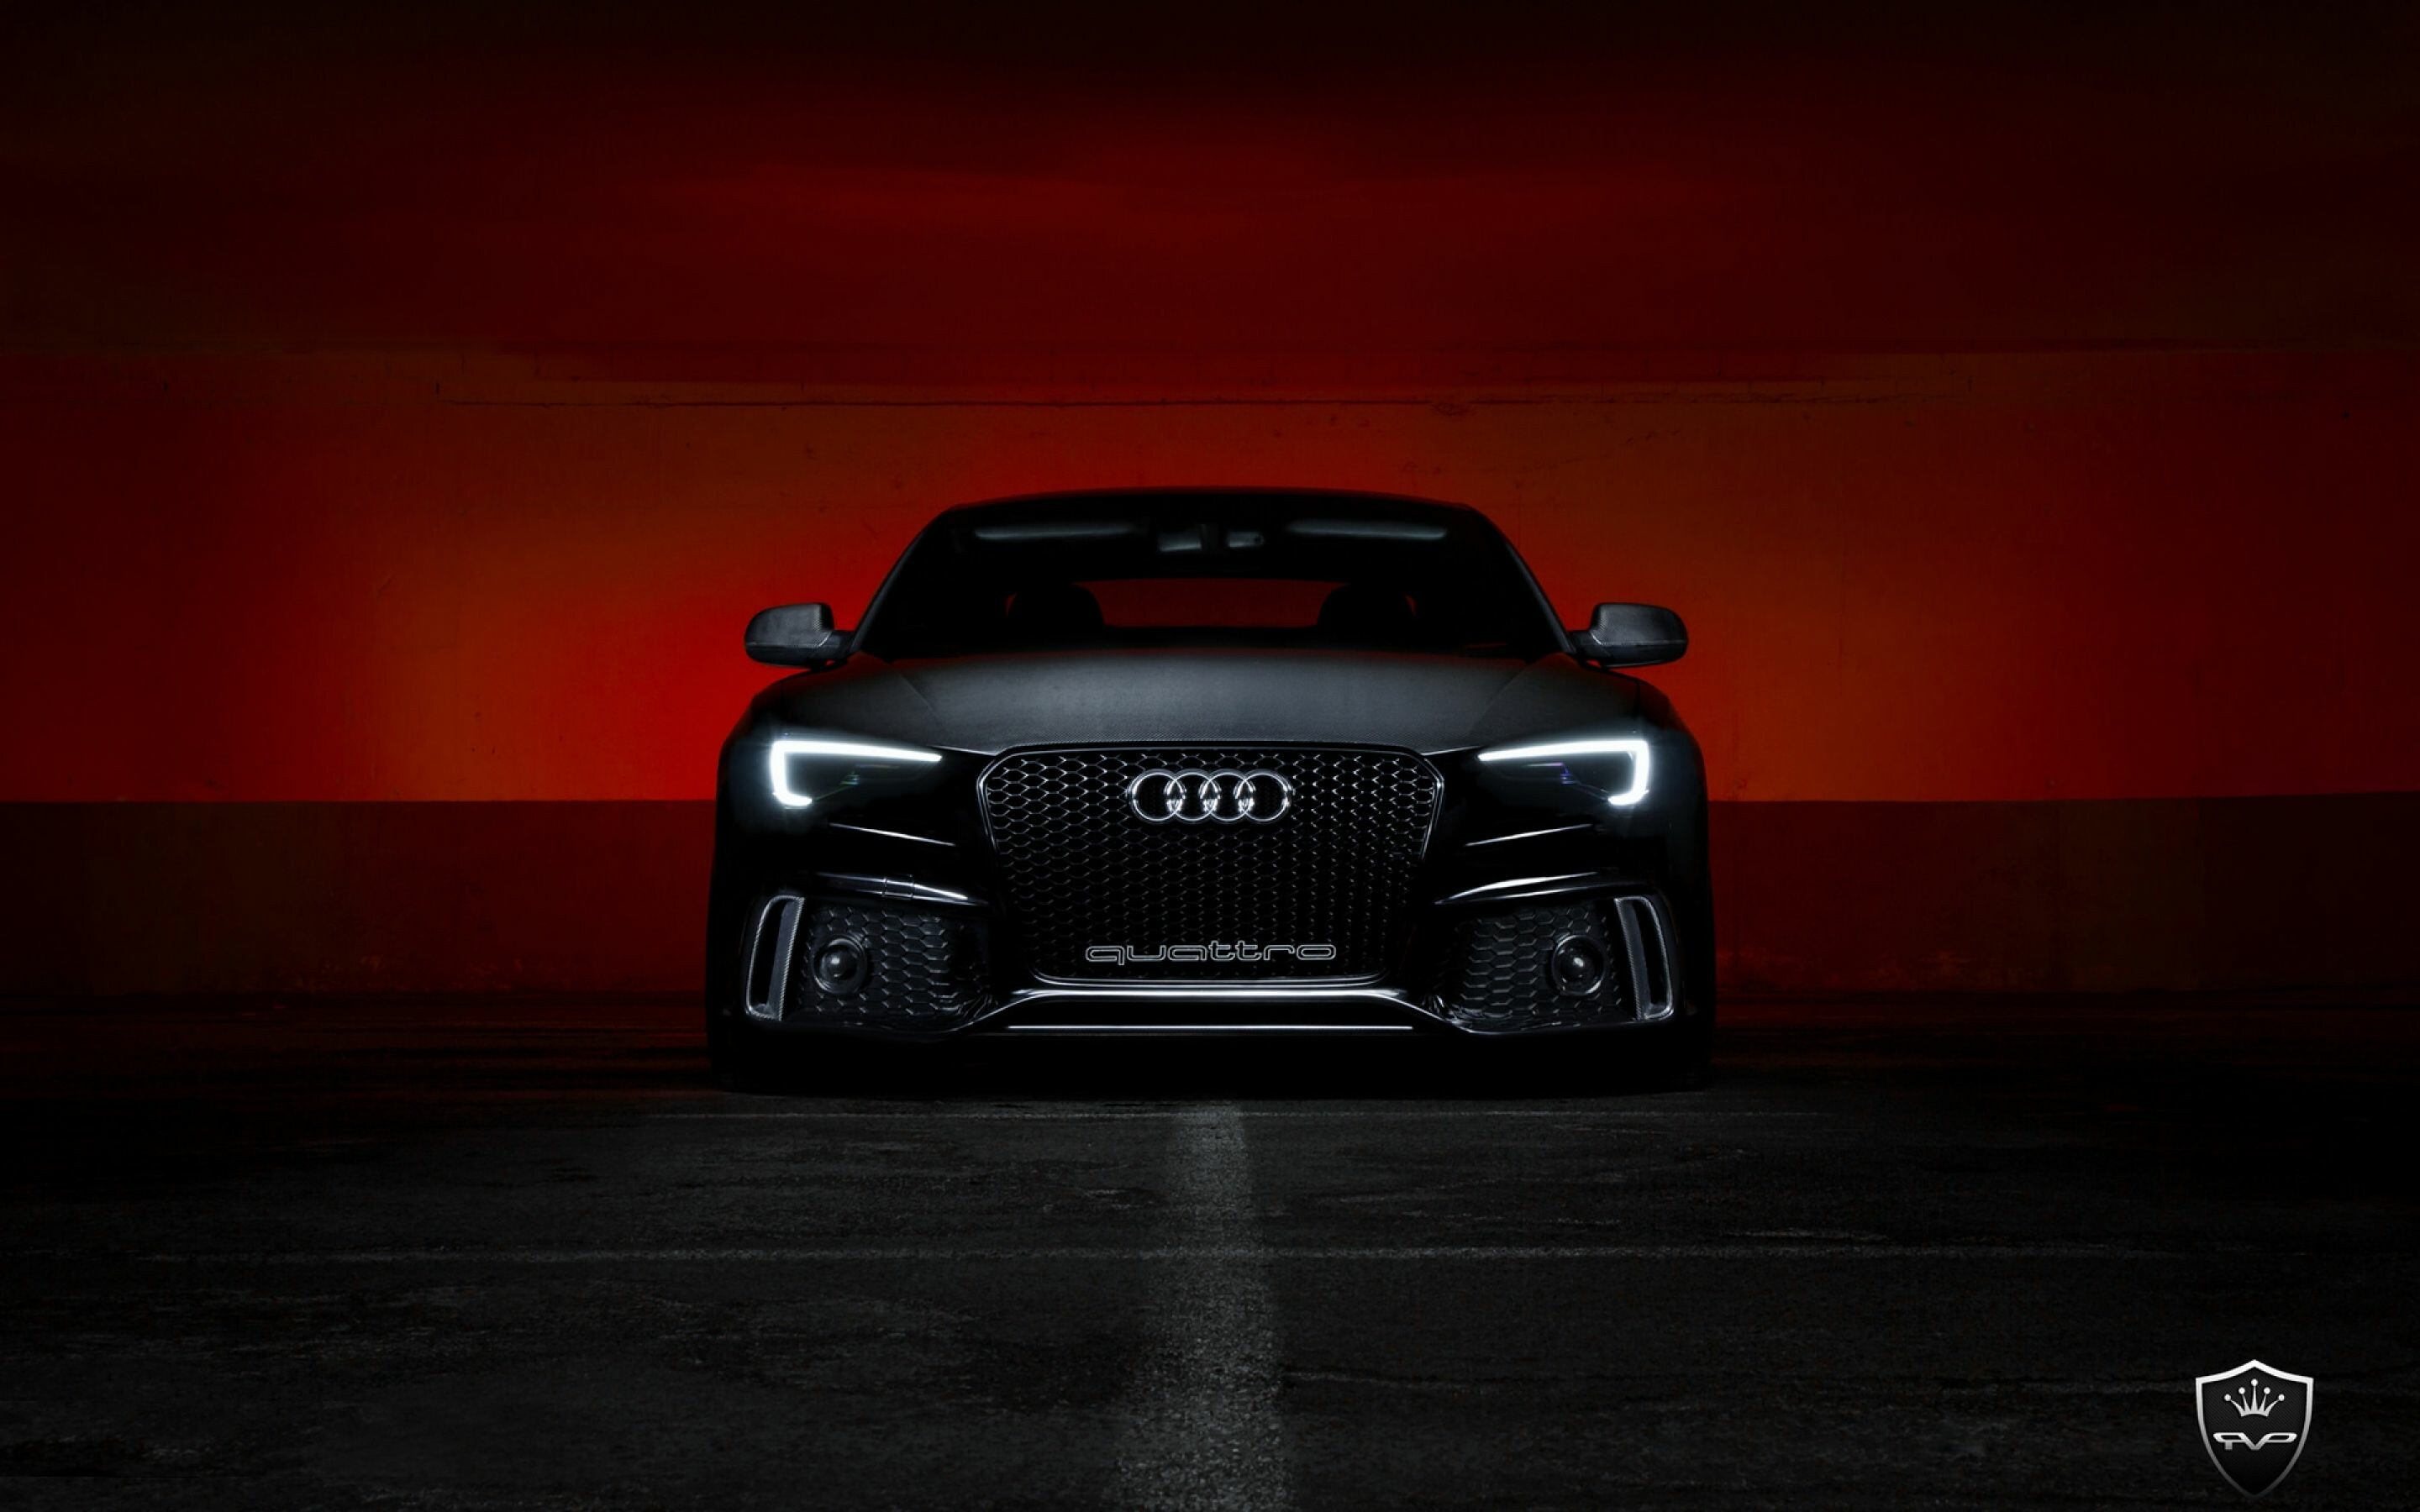 Download Audi wallpapers for mobile phone free Audi HD pictures